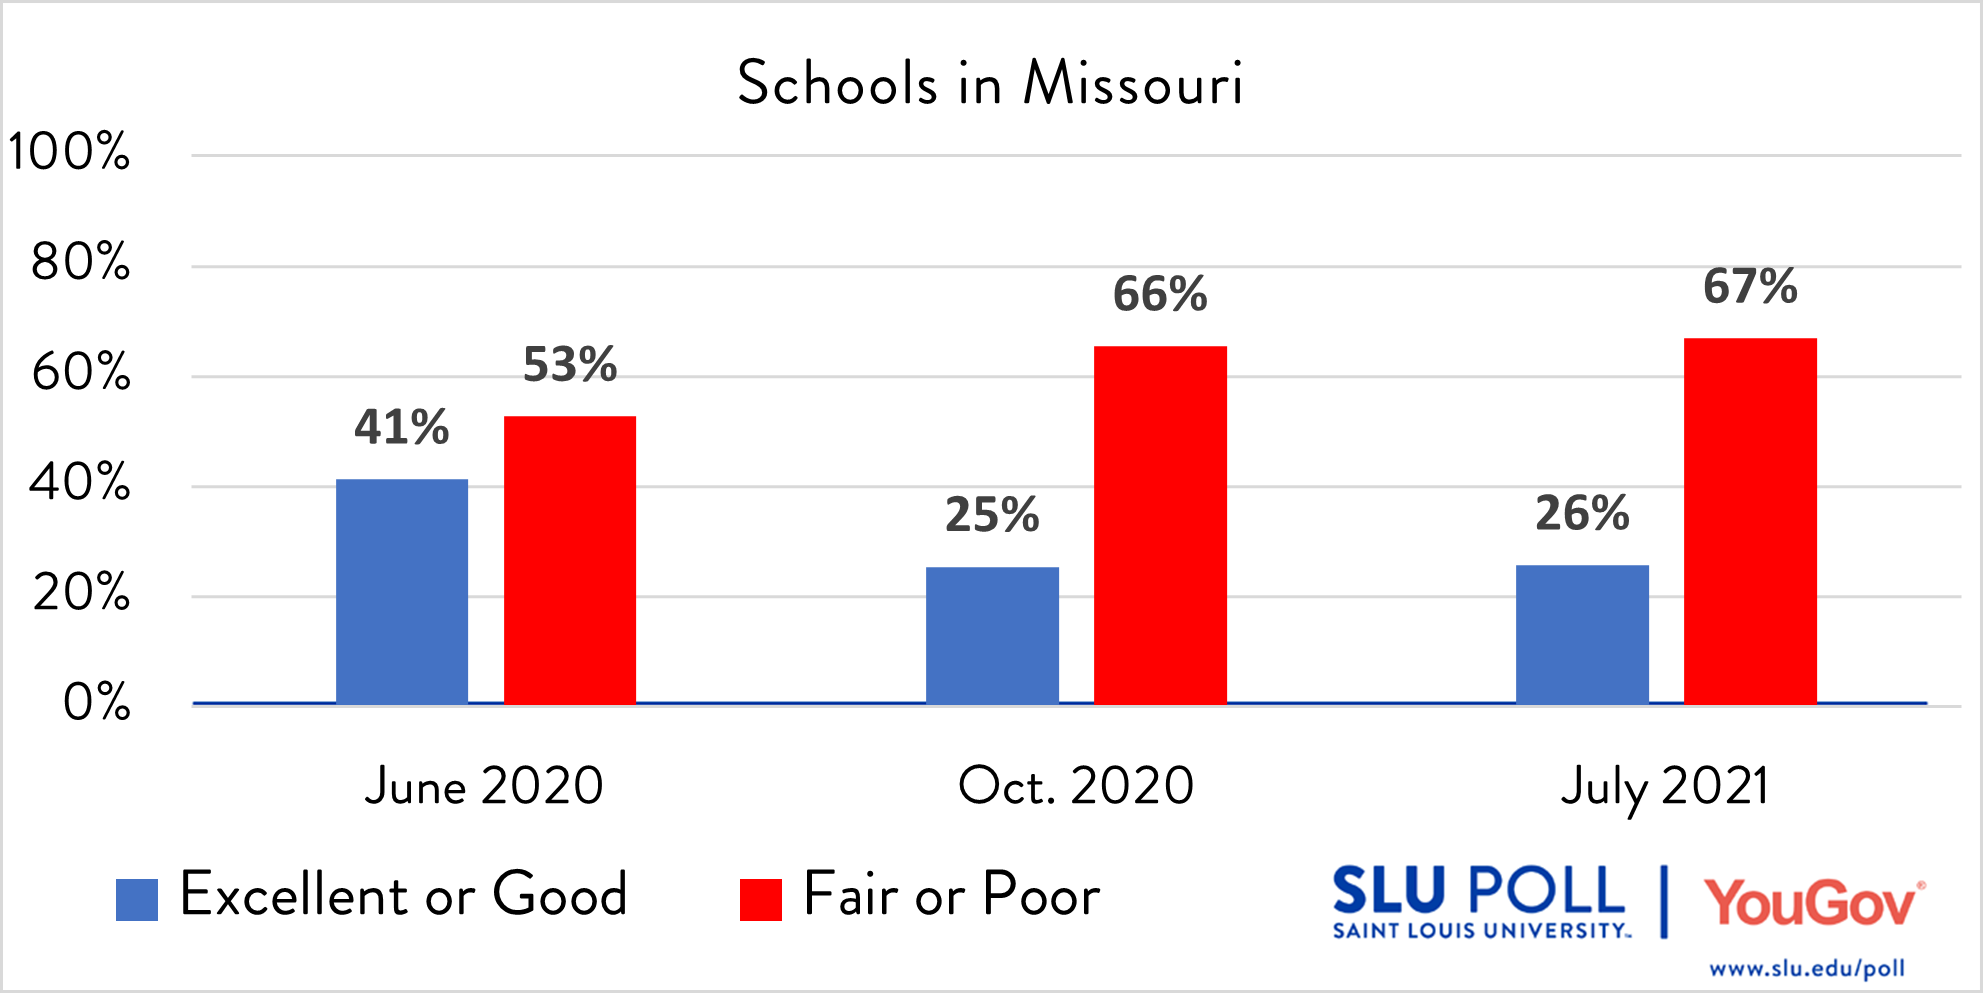 How would you rate the following…Public Schools in the State of Missouri? - Excellent: 2% - Good: 24% - Fair: 41% - Poor: 26% - Not sure: 7%